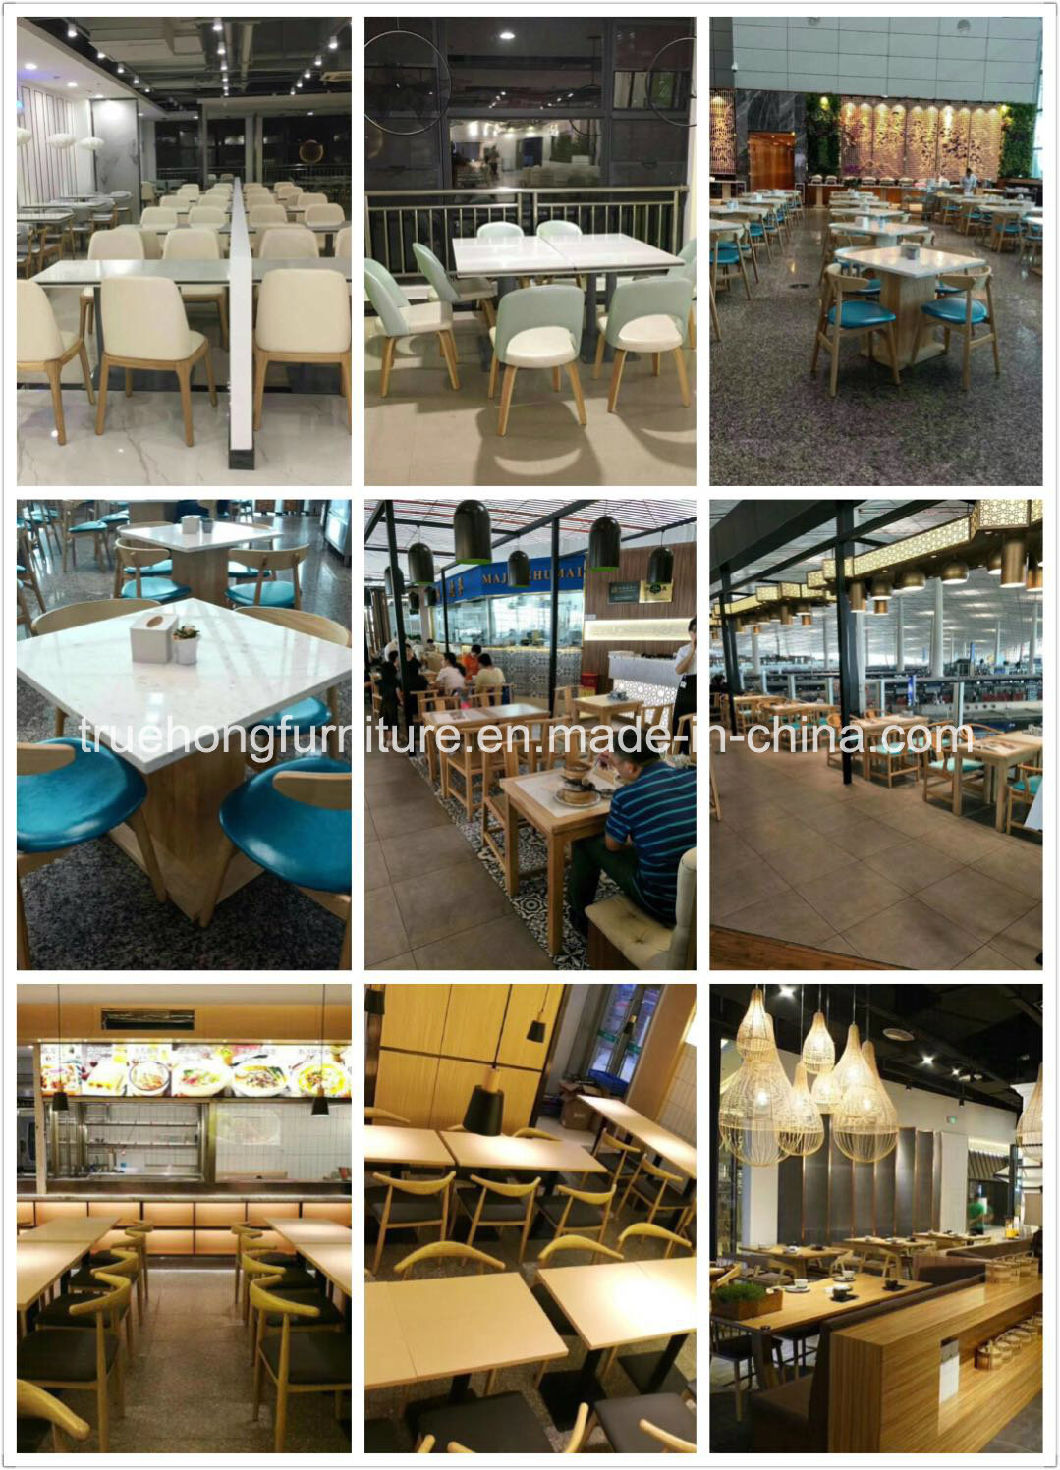 Top Sale Certified Commercial Wood Restaurant Chairs